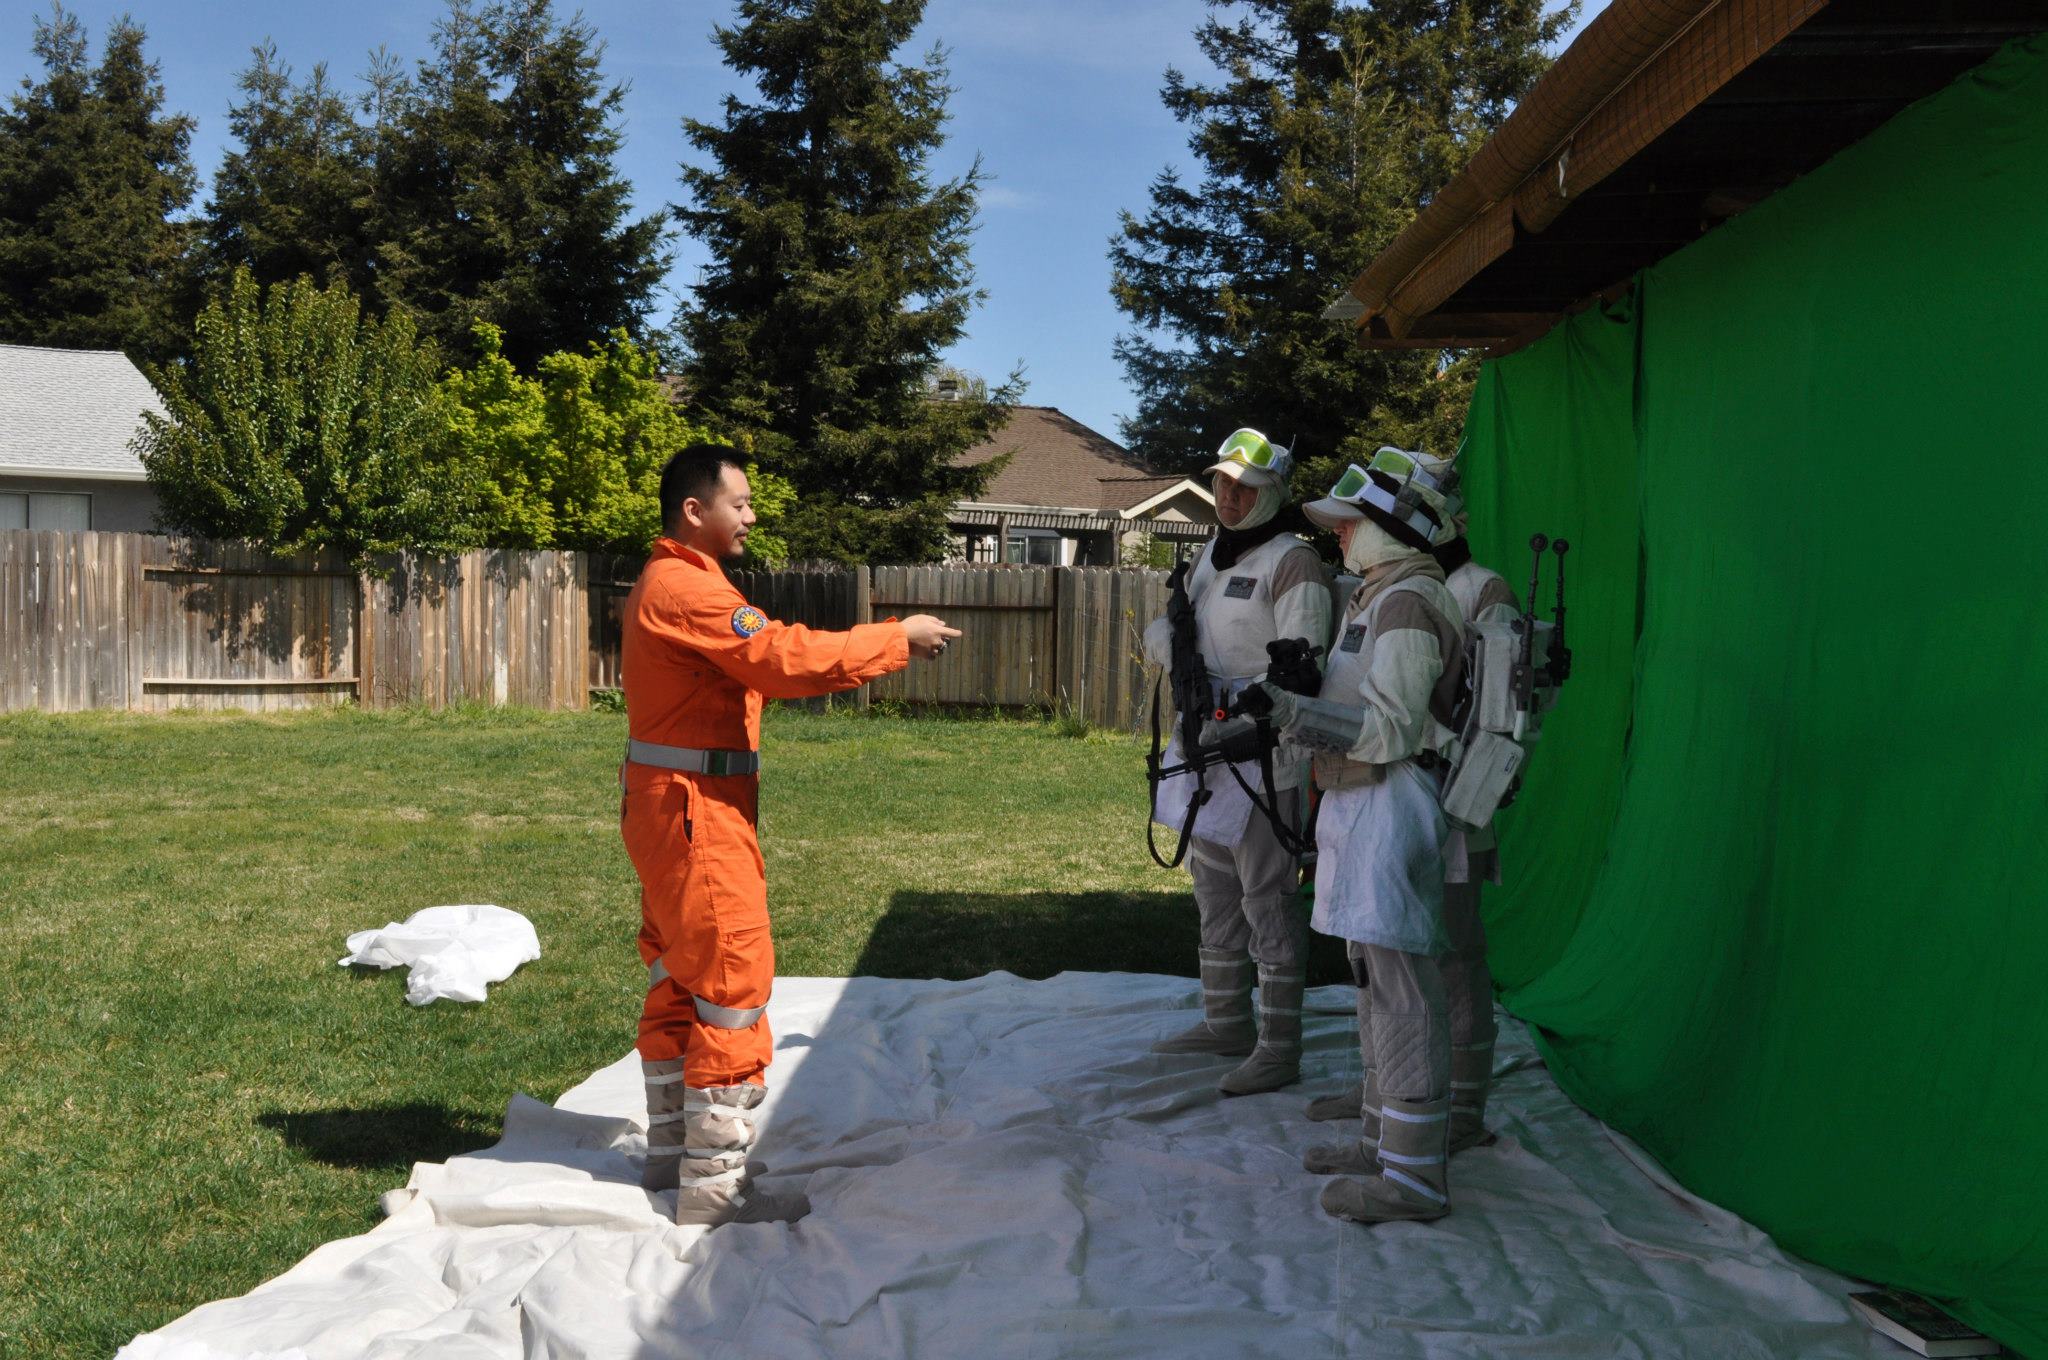 Color photo of man in orange jumpsuit directing two men dressed in rebel soldier uniforms standing in front of a green screen in a backyard.